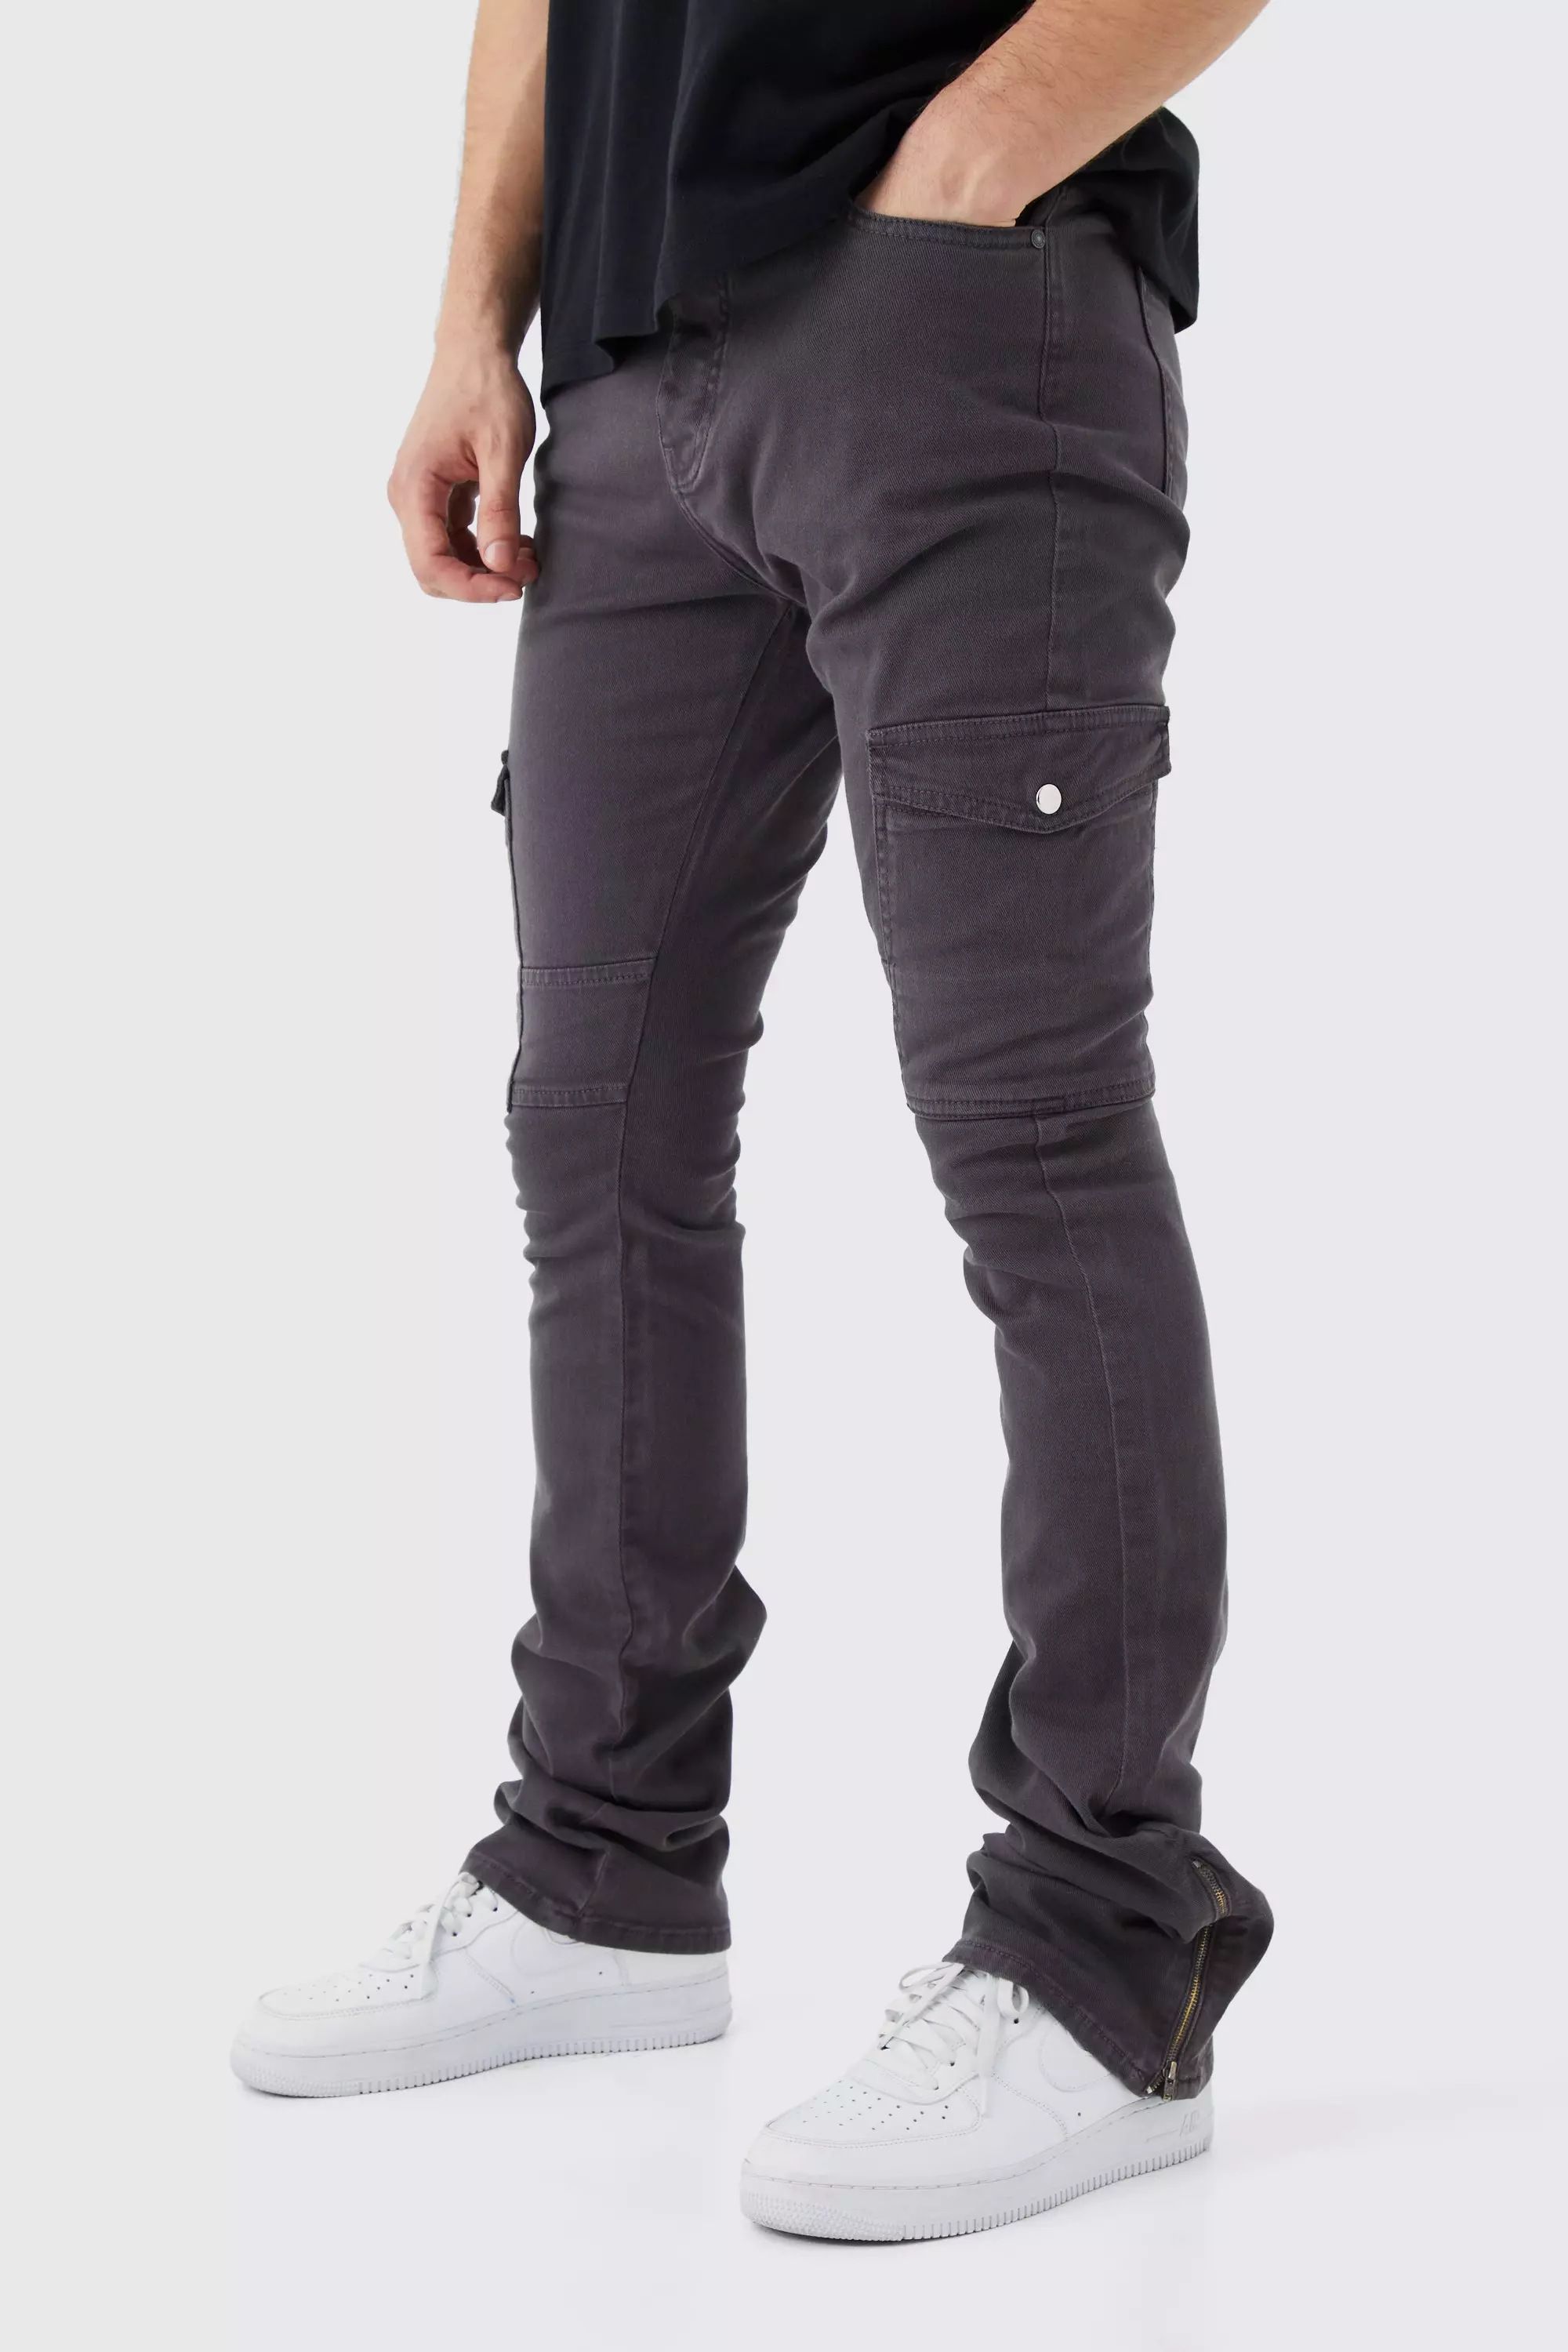 Charcoal Grey Tall Fixed Waist Skinny Stacked Zip Gusset Cargo Pants